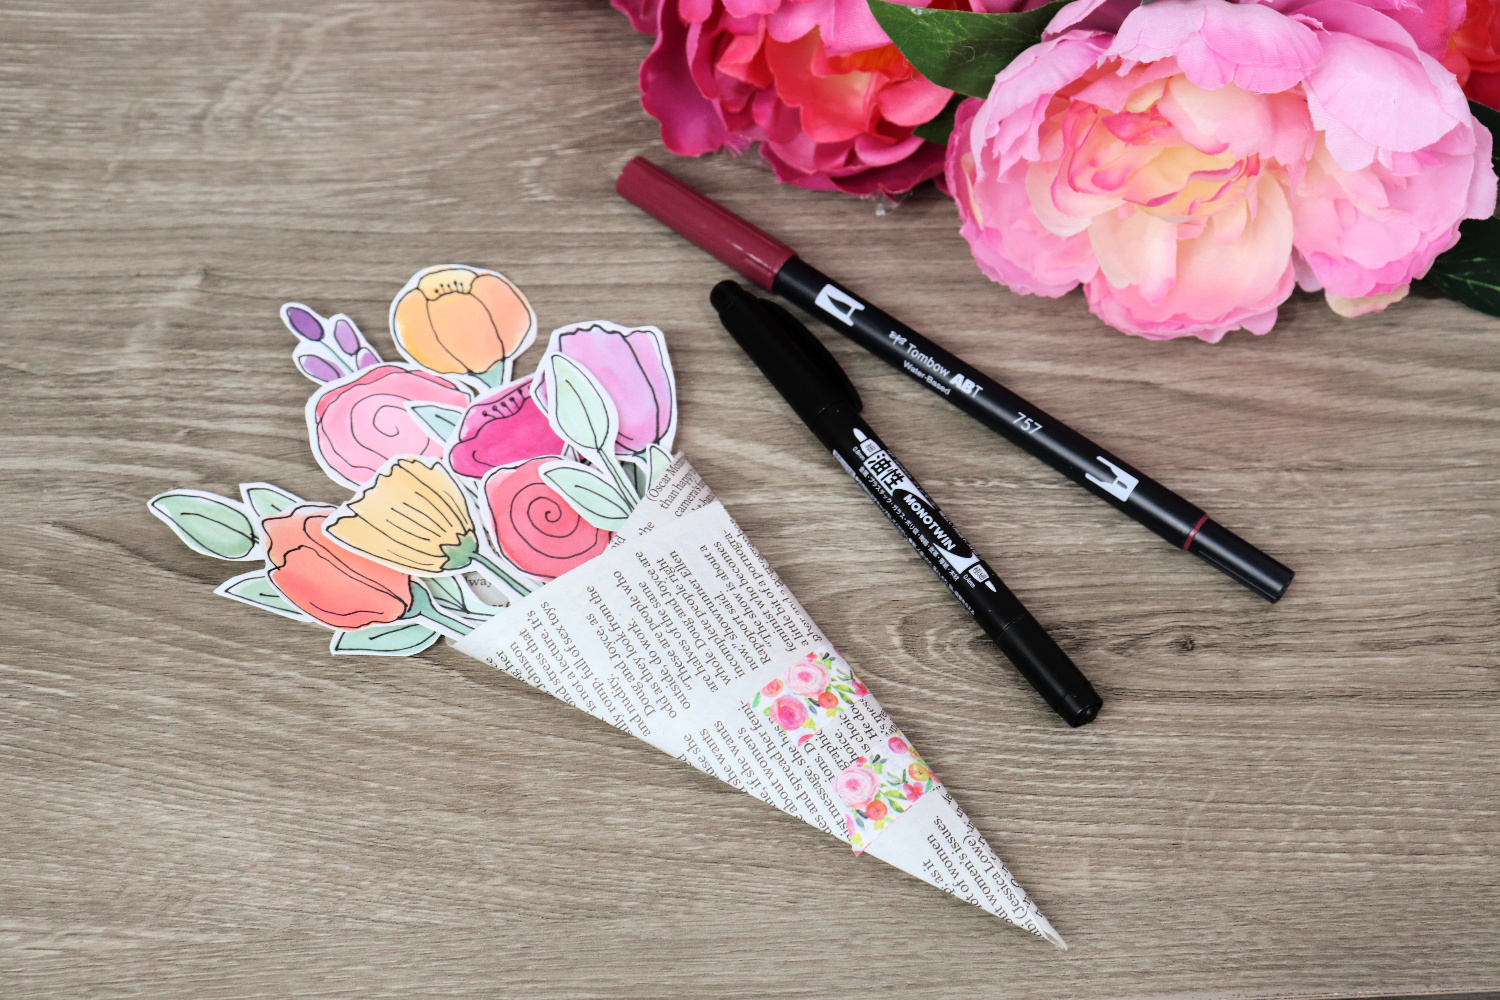 Image contains a bouquet made of 10 watercolor flowers and stems tucked into a piece of wrapped newspaper. Two Tombow markers and several silk flowers sit nearby on a wooden surface.